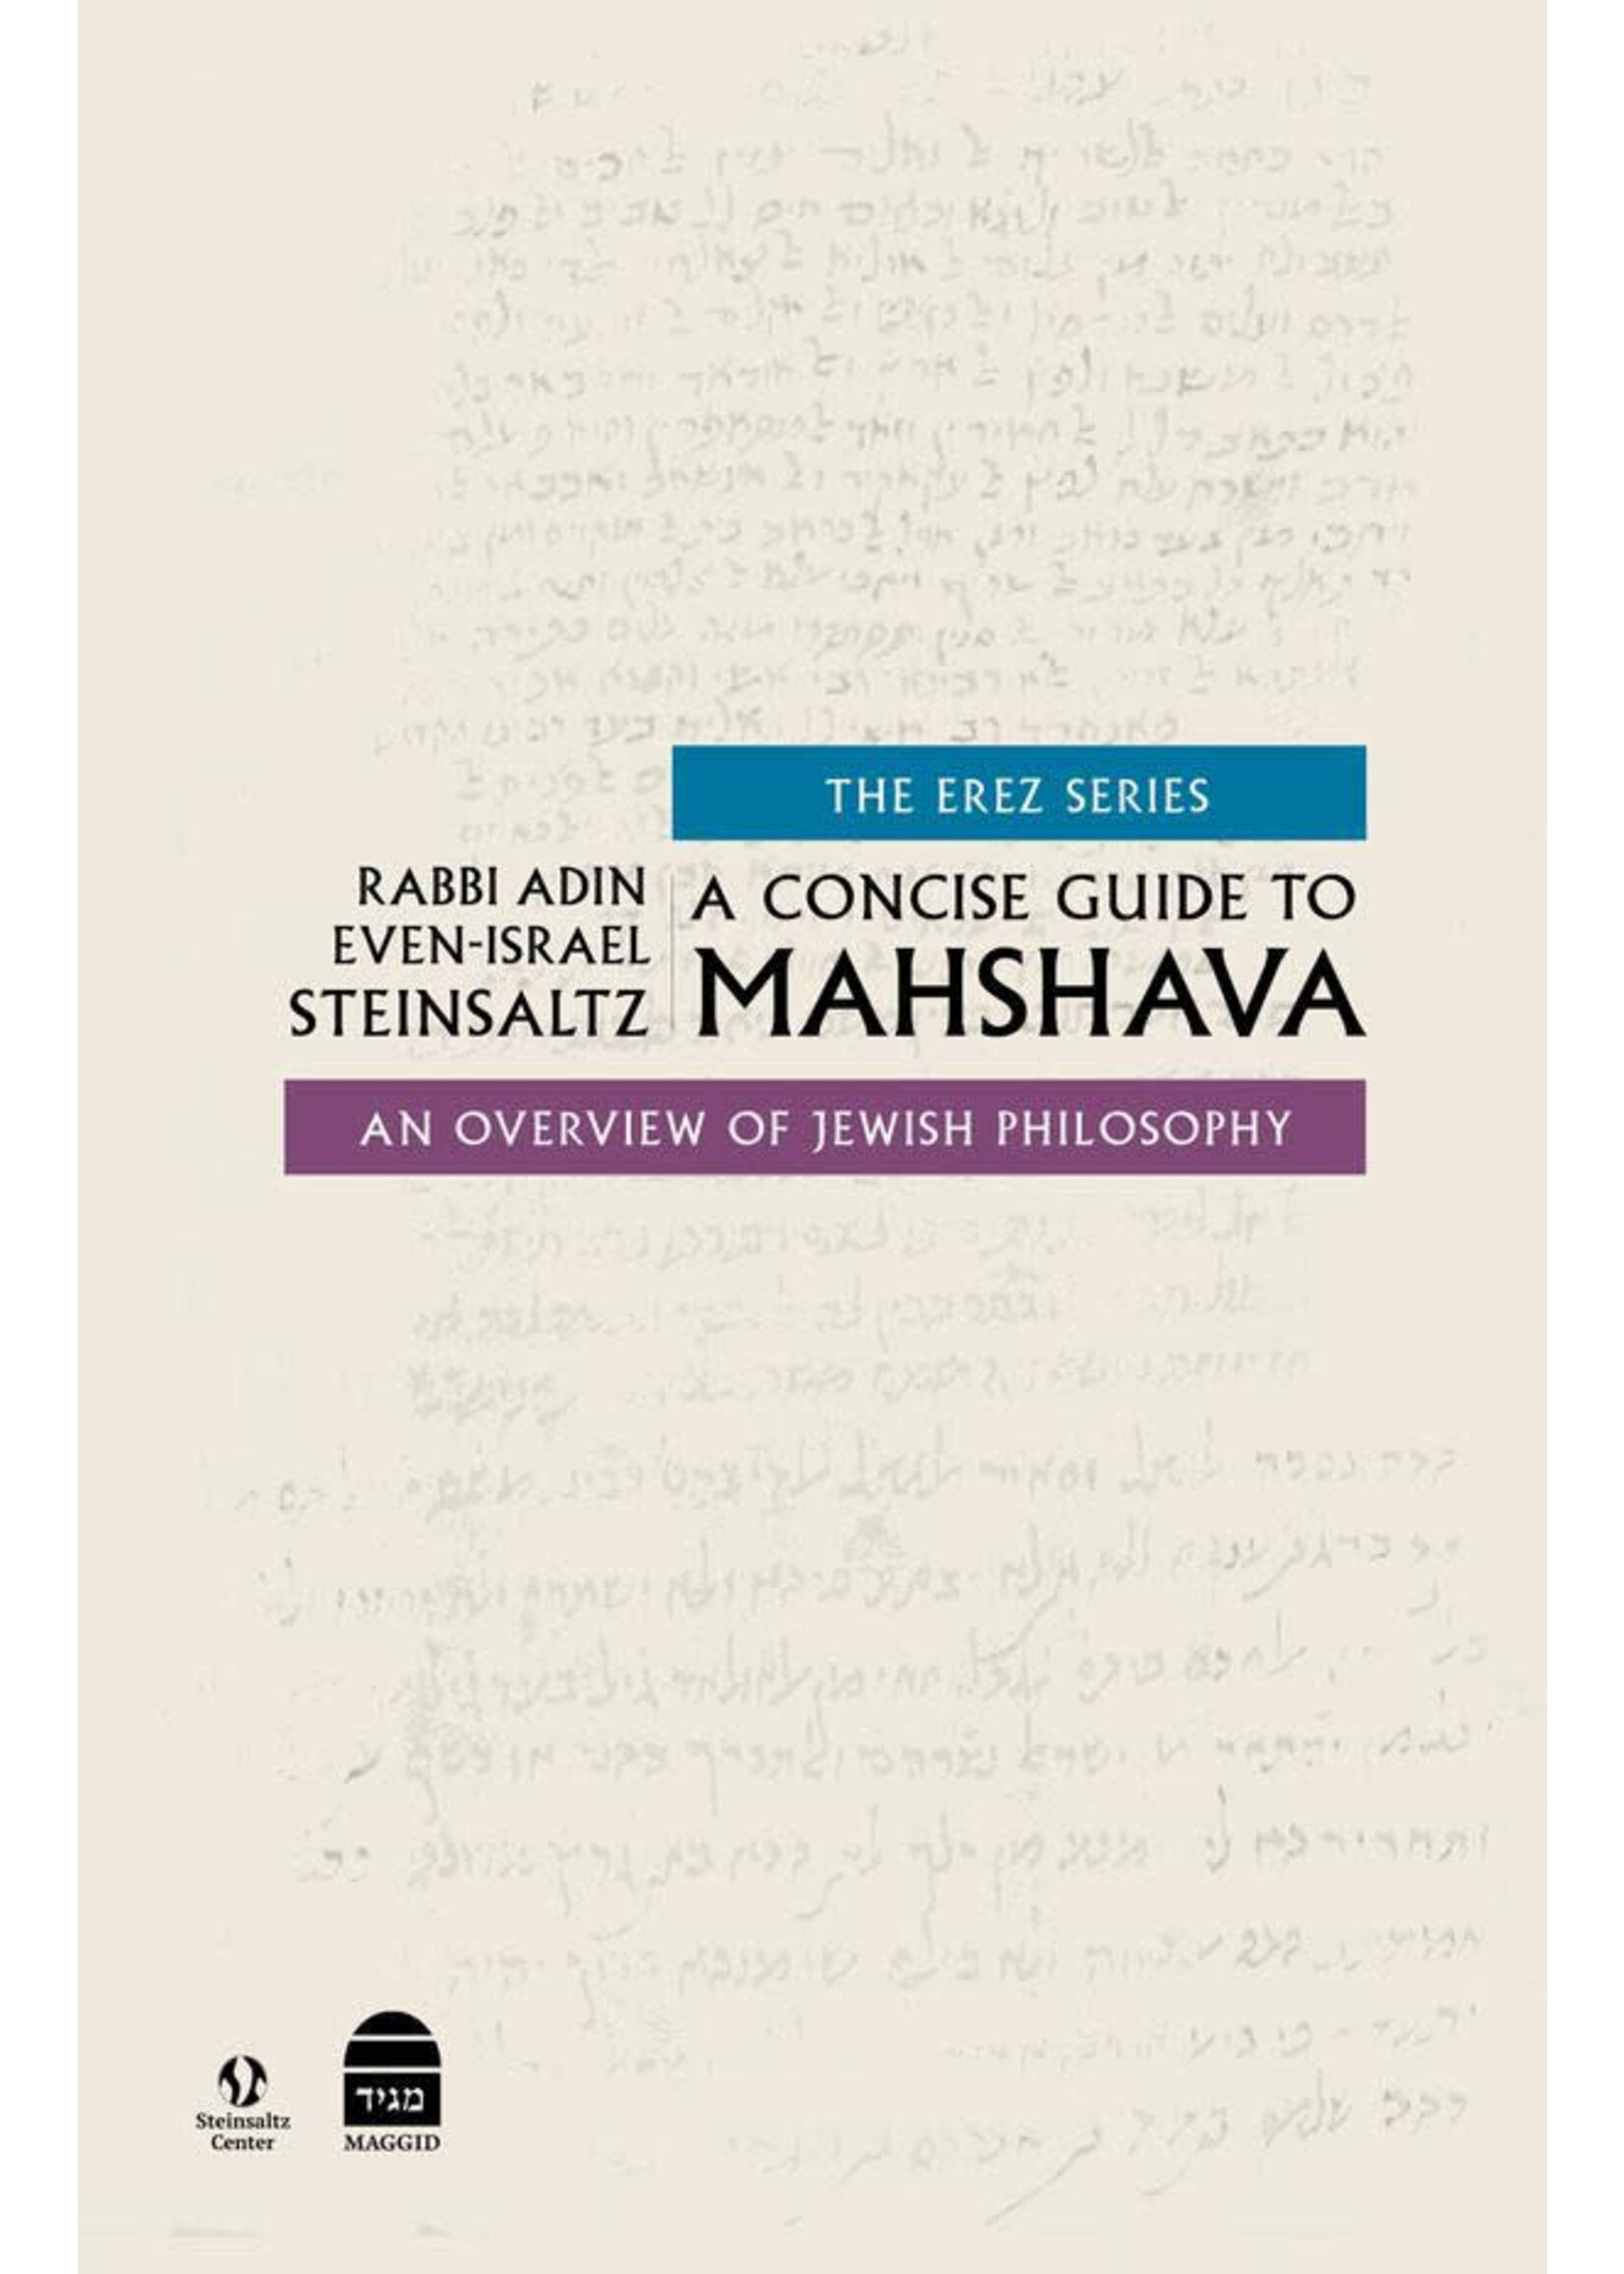 A CONCISE GUIDE TO MAHSHAVA